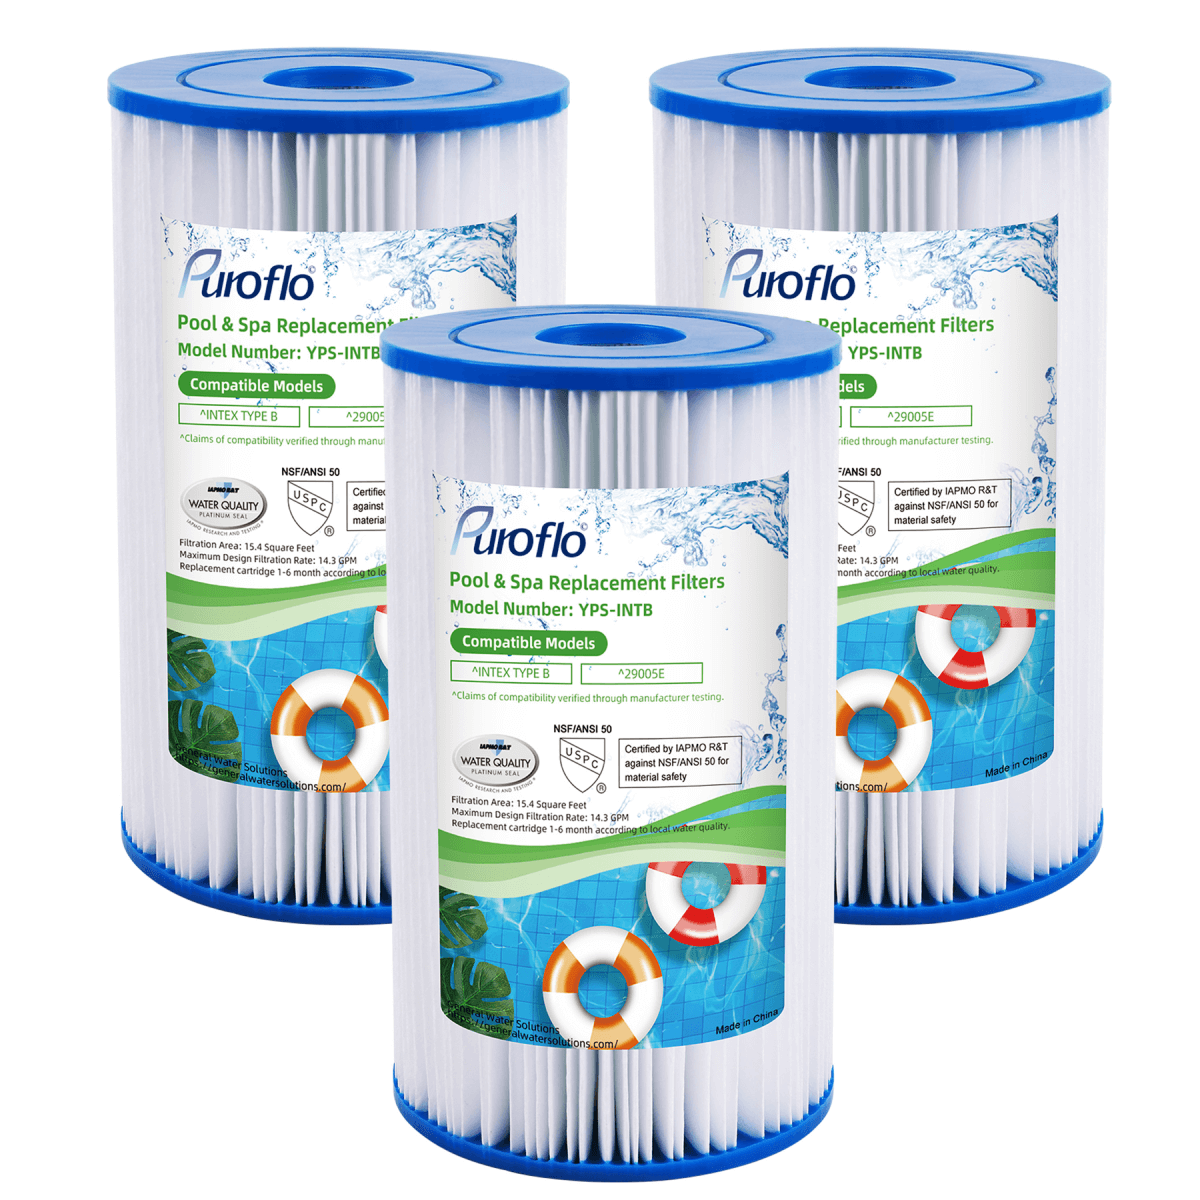 Puroflo Type B 29005E Replacement Pool Filter Cartridge for INTEX (3 Pack)